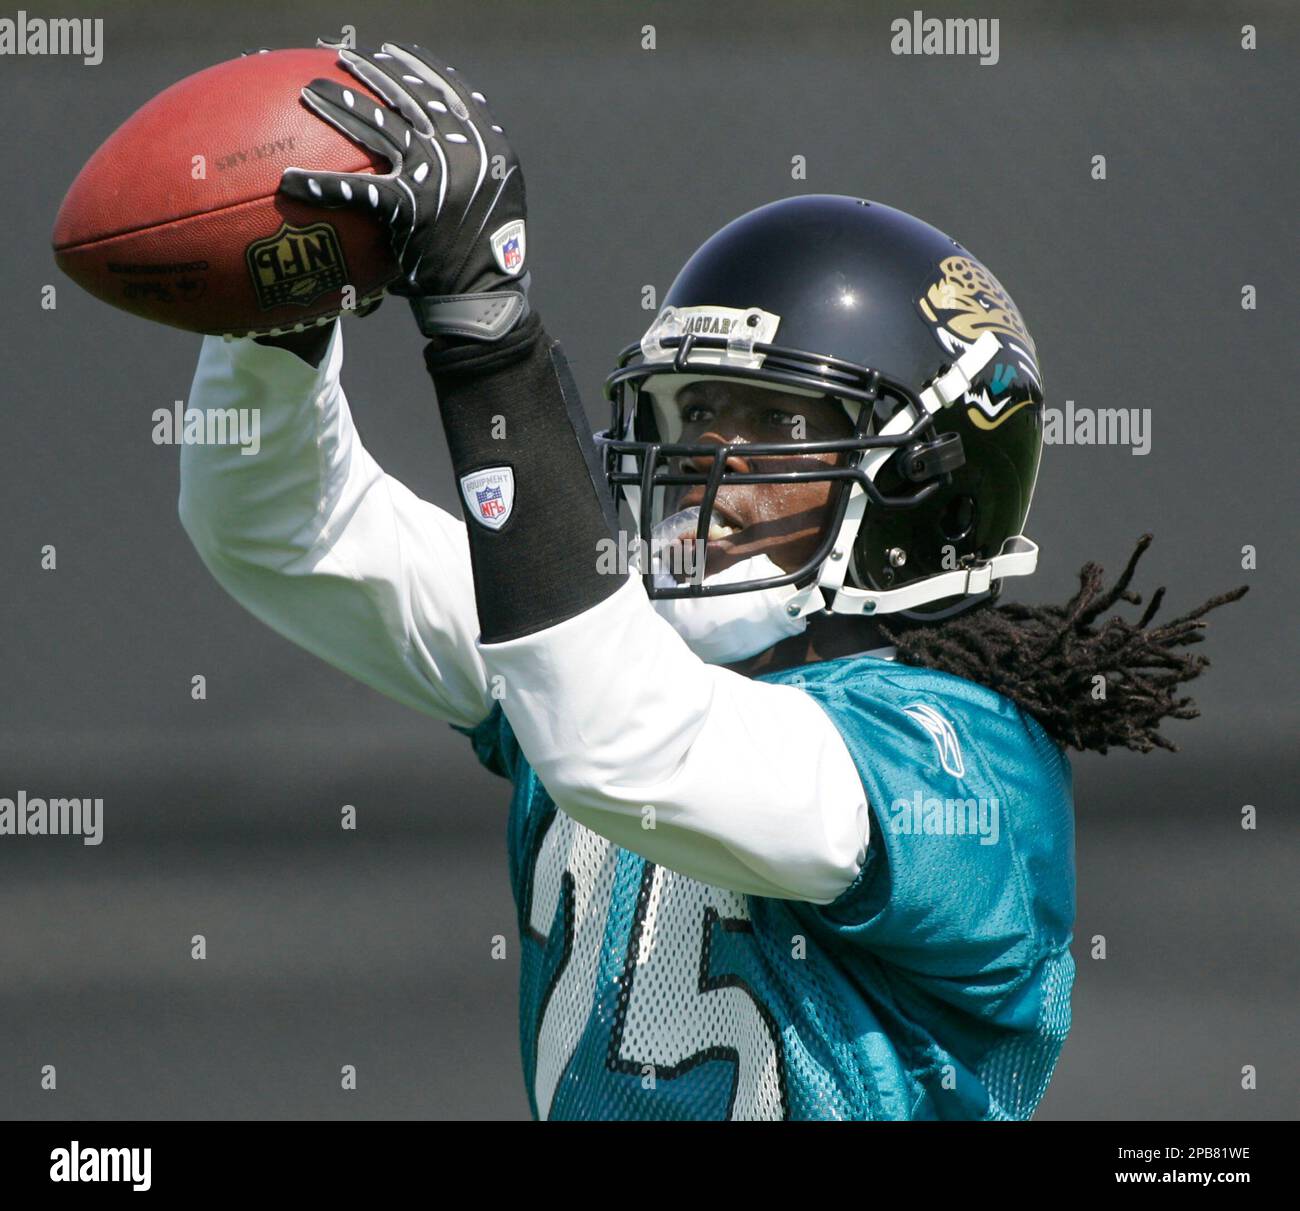 Jacksonville Jaguars defensive back Reggie Nelson, makes a catch during the  Jaguars first day of football training camp, Saturday, July 28, 2007, in  Jacksonville, Fla. Nelson is the Jaguars first-round draft pick